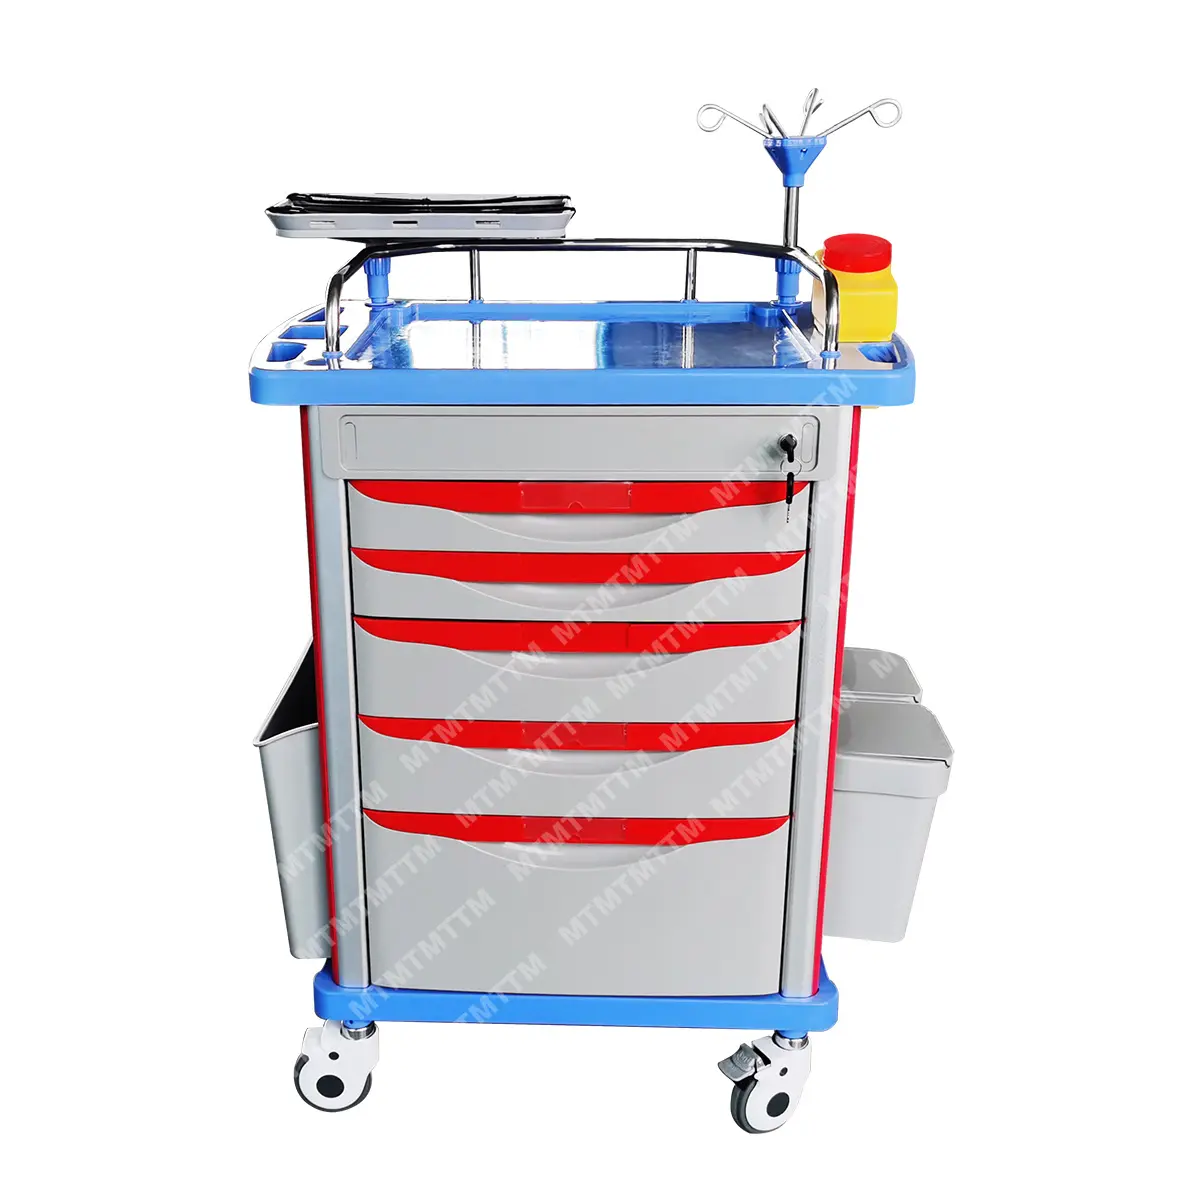 MT Medical Medical Professional Class Train Drug CD -Rongroufeng or Anesthesia Traveler cart